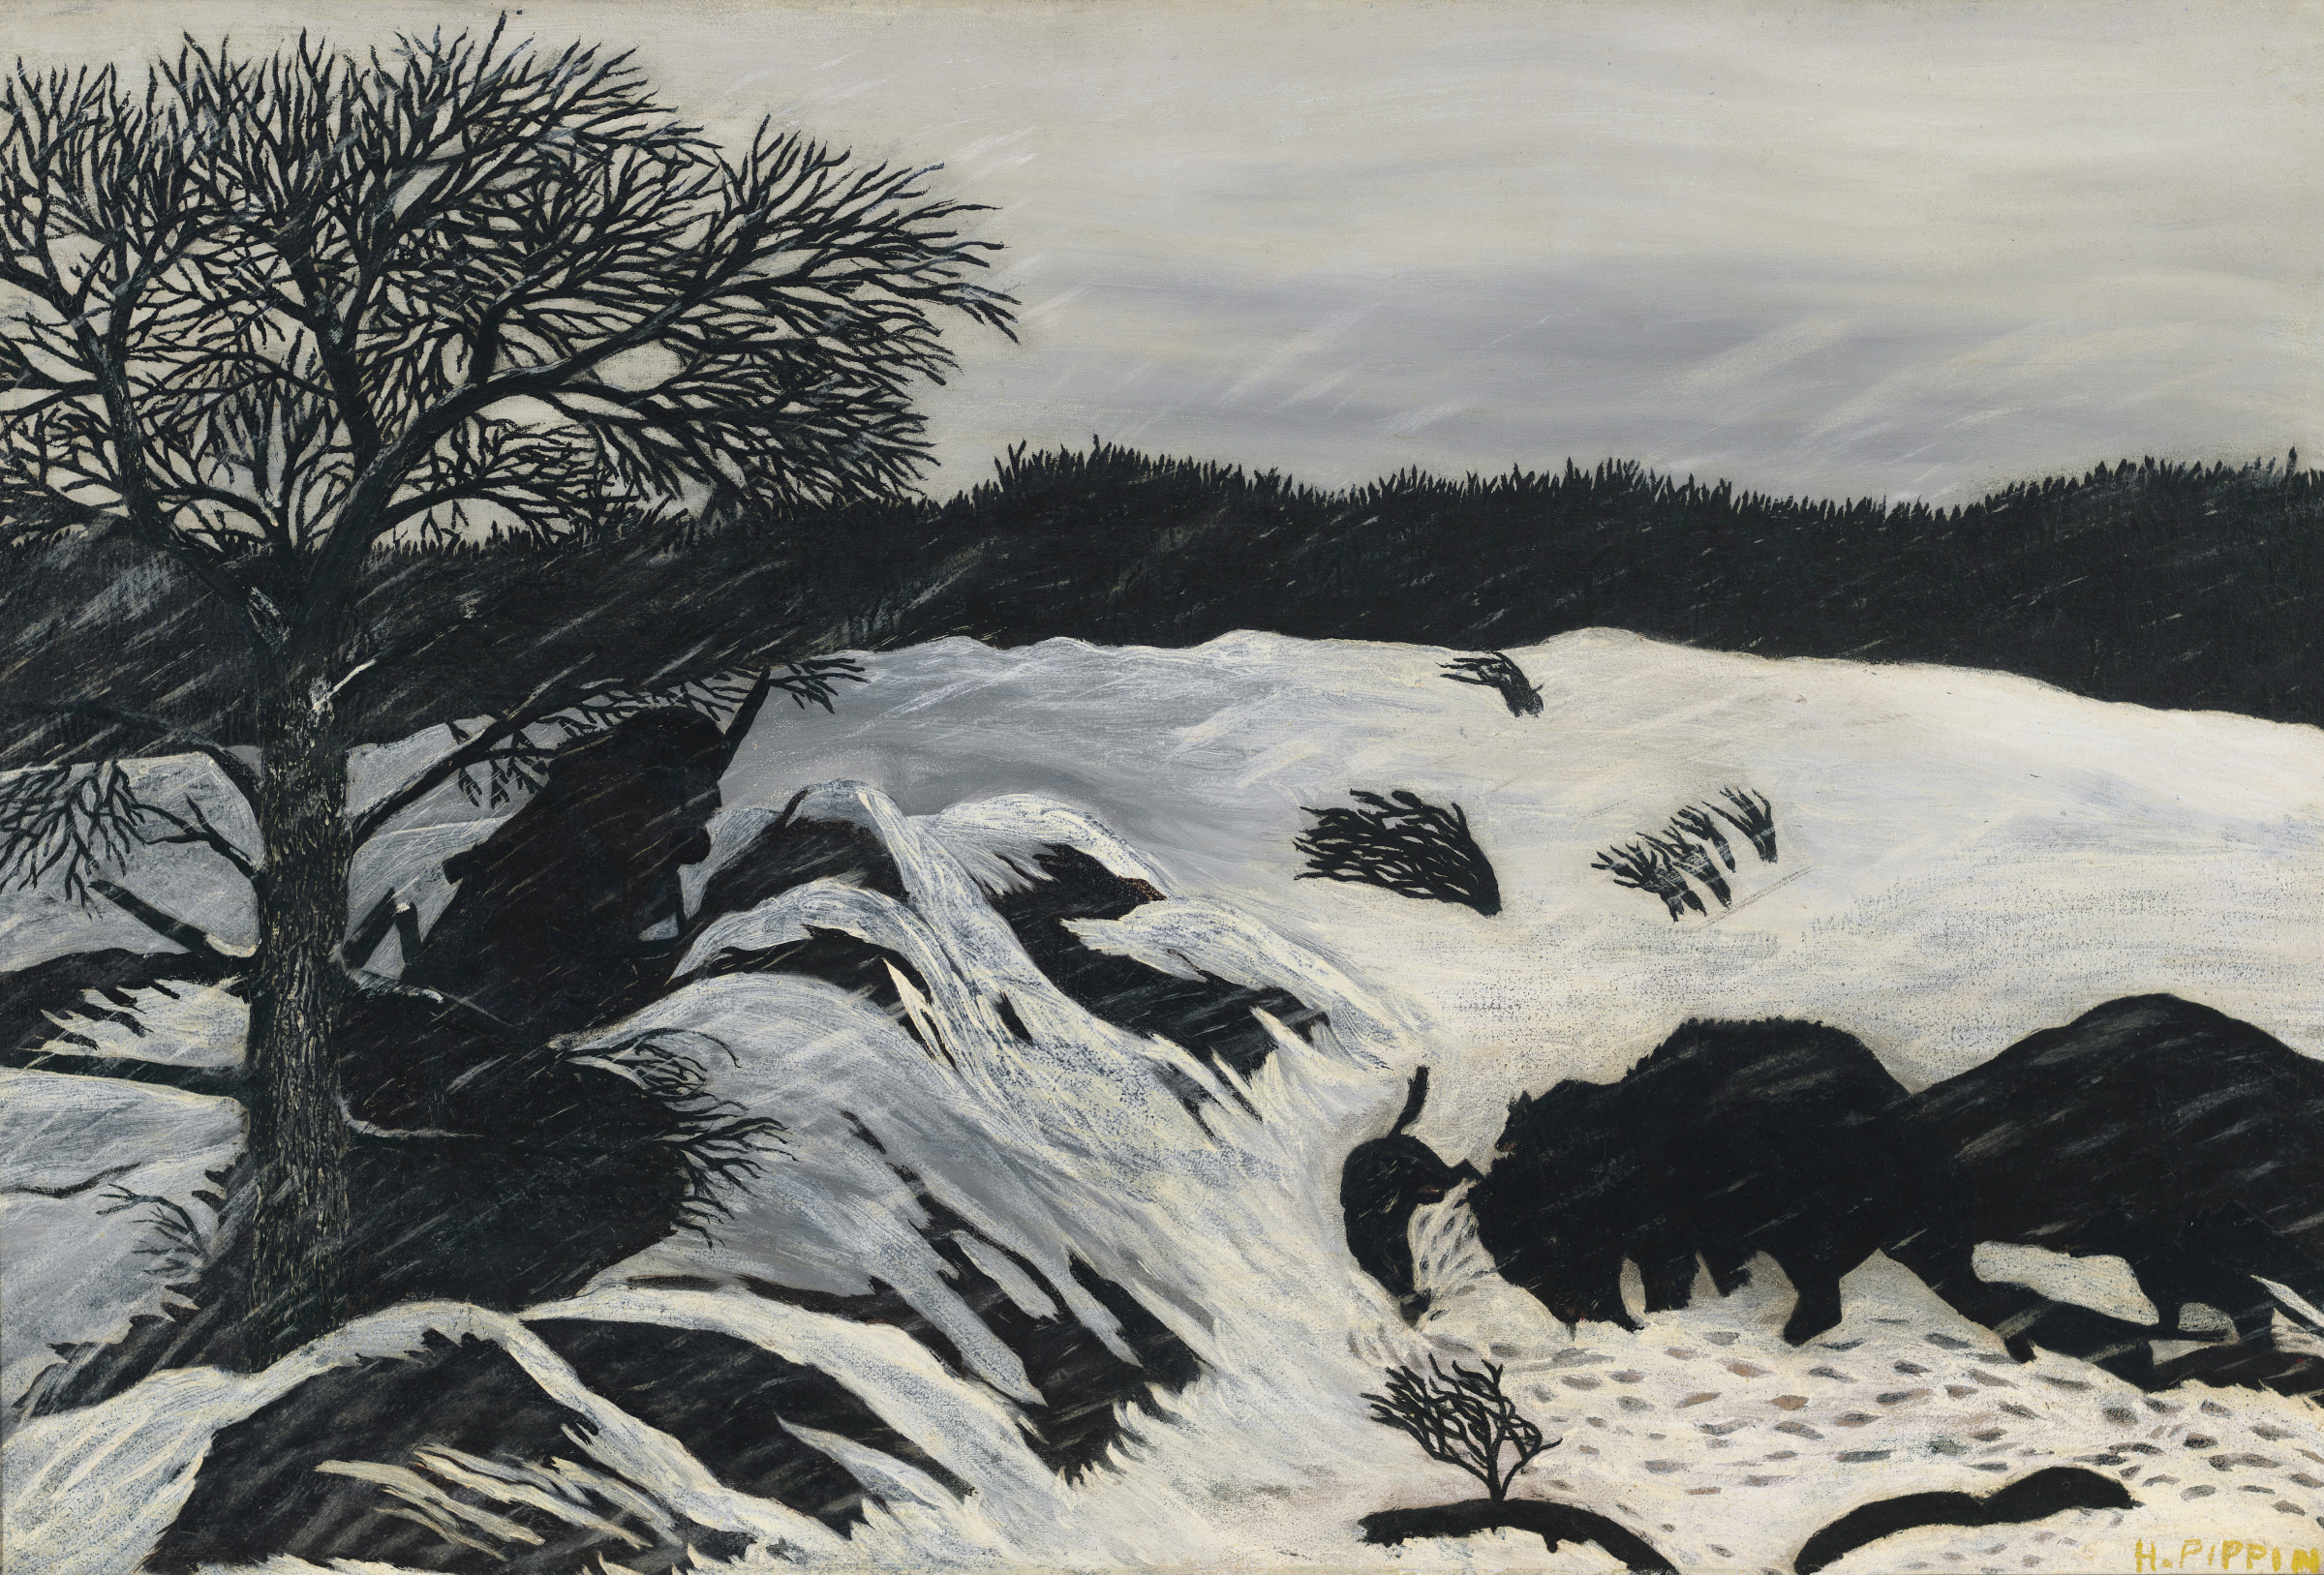 This is a painting by Horace Pippin of a snowy field with dark trees and buffalo tracks.